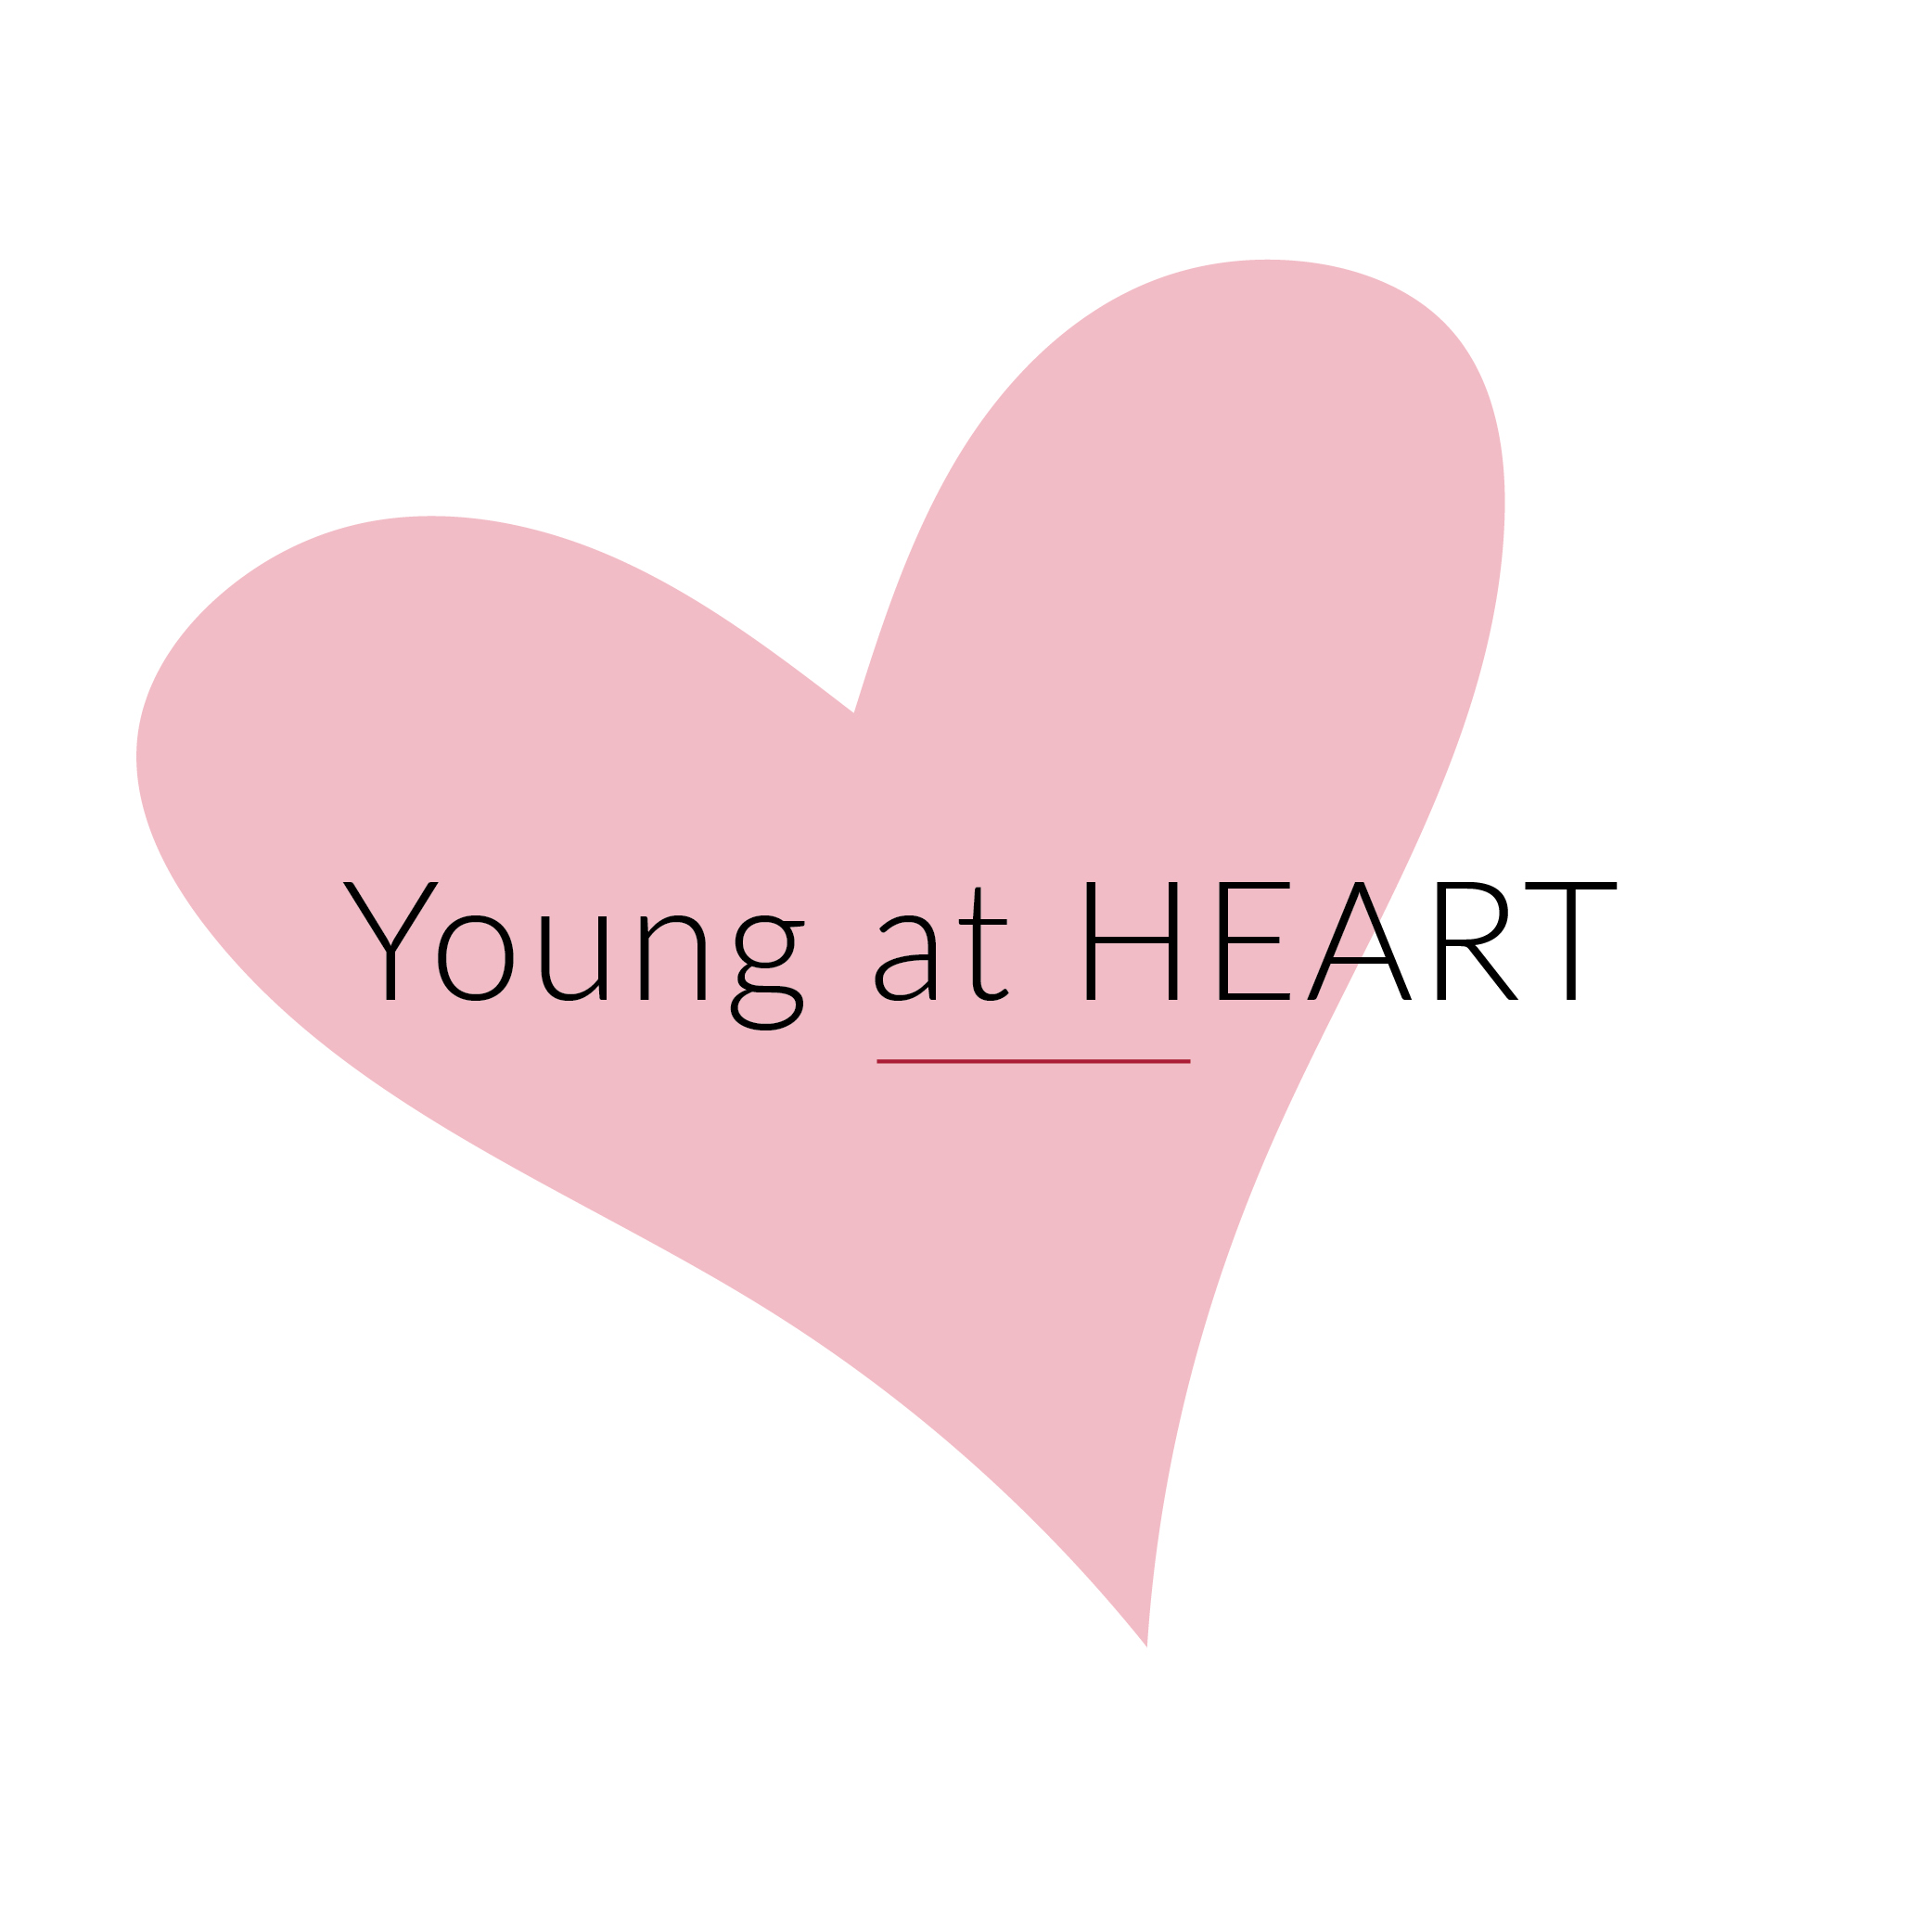 Young at HEART 2016